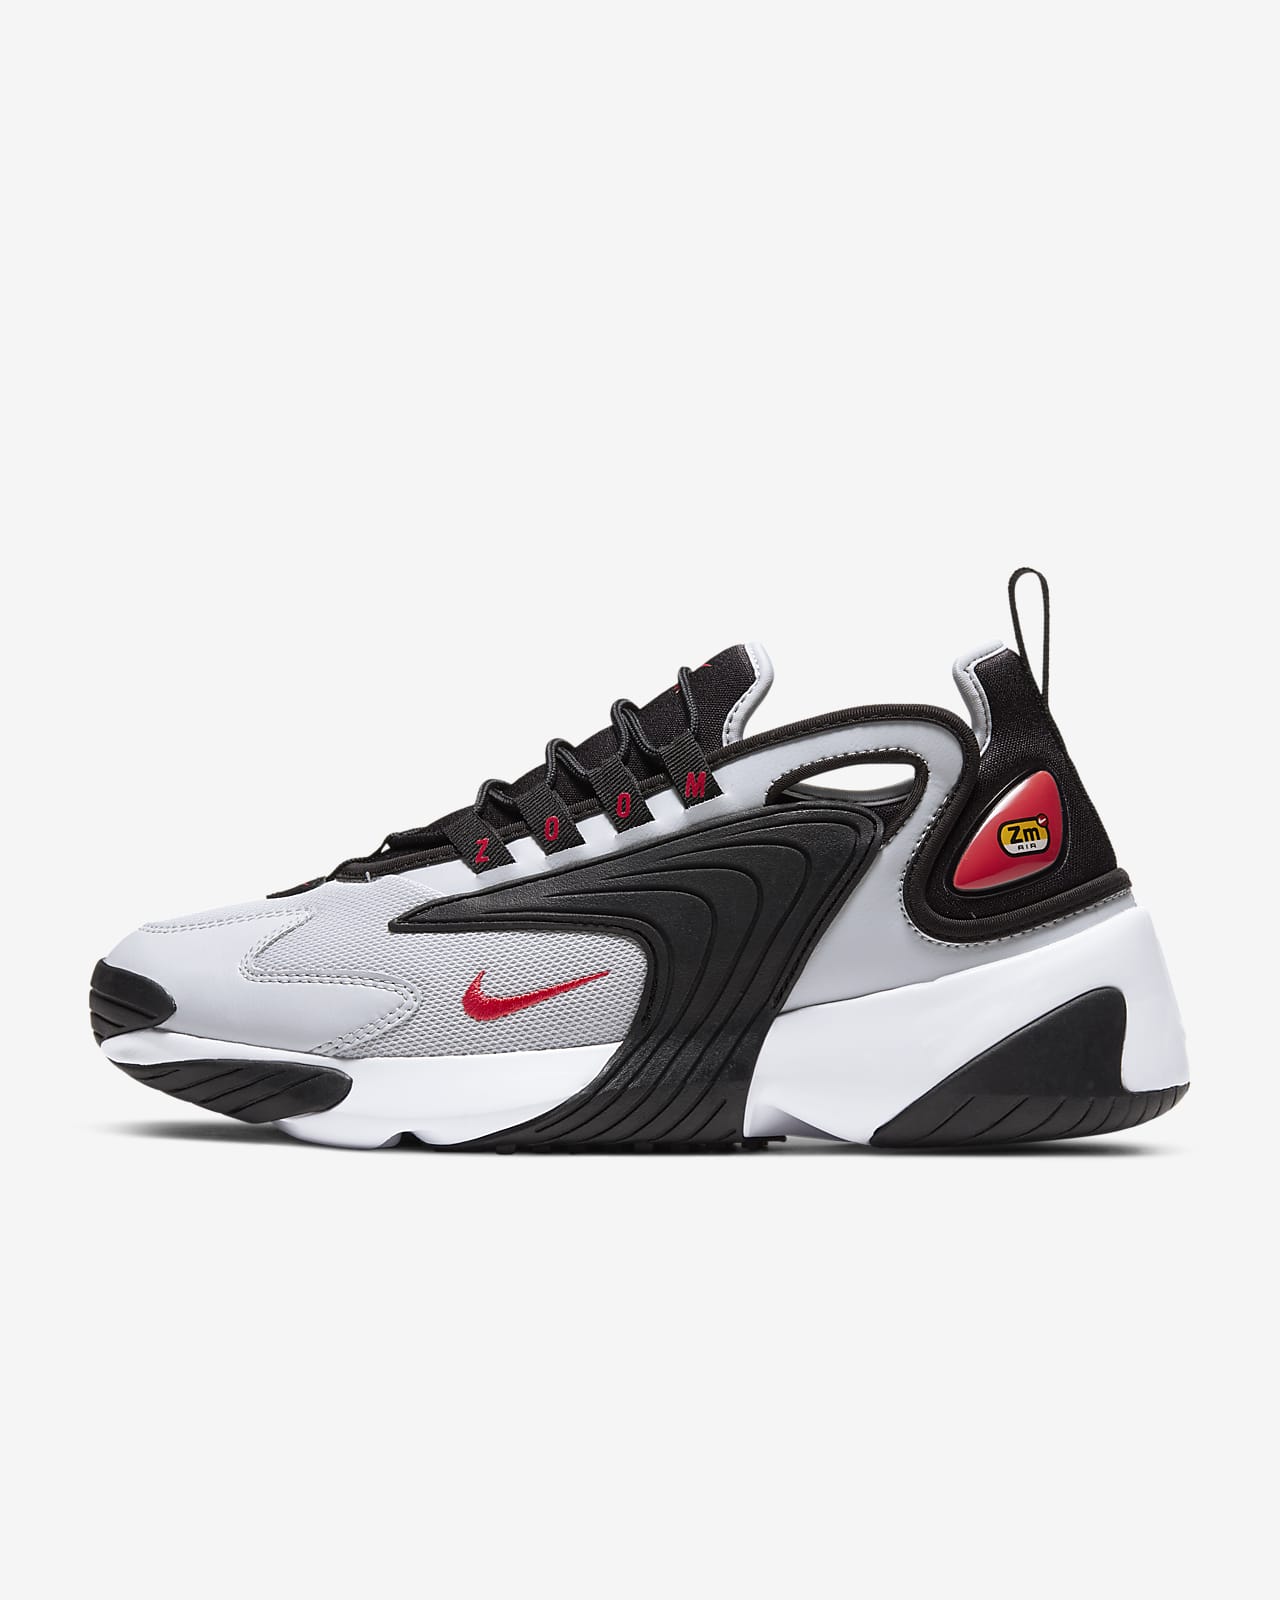 Grey Nike Zoom 2k Online Sale, UP TO 65% OFF